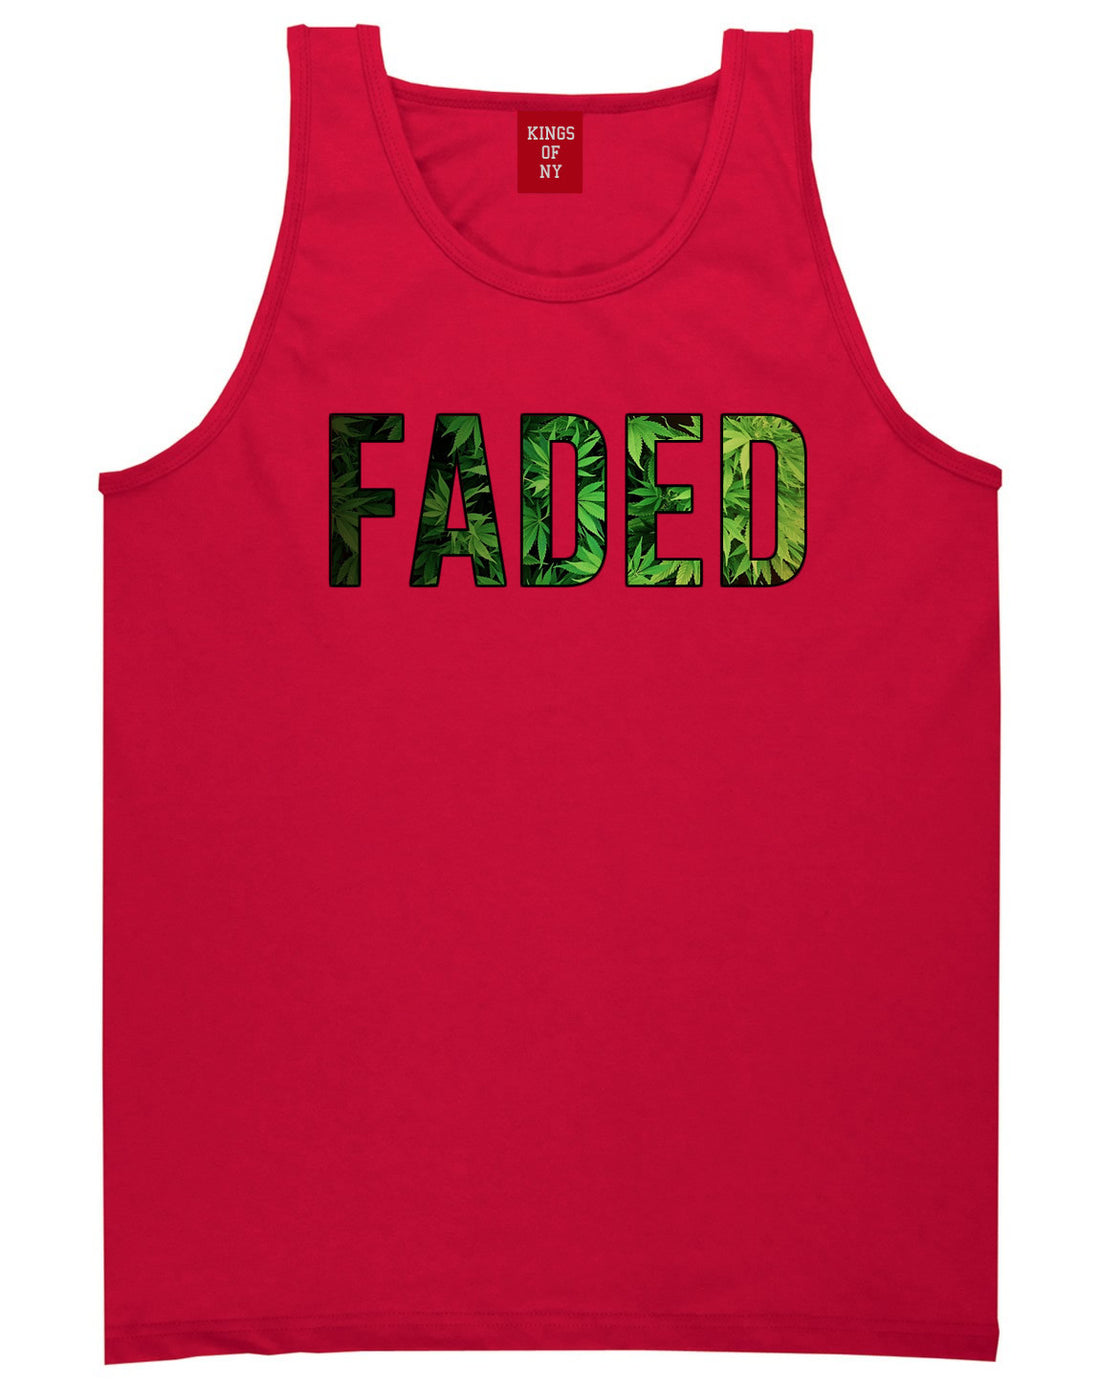 Faded Plant Life Marijuana Drugs Legalize Tank Top In Red by Kings Of NY